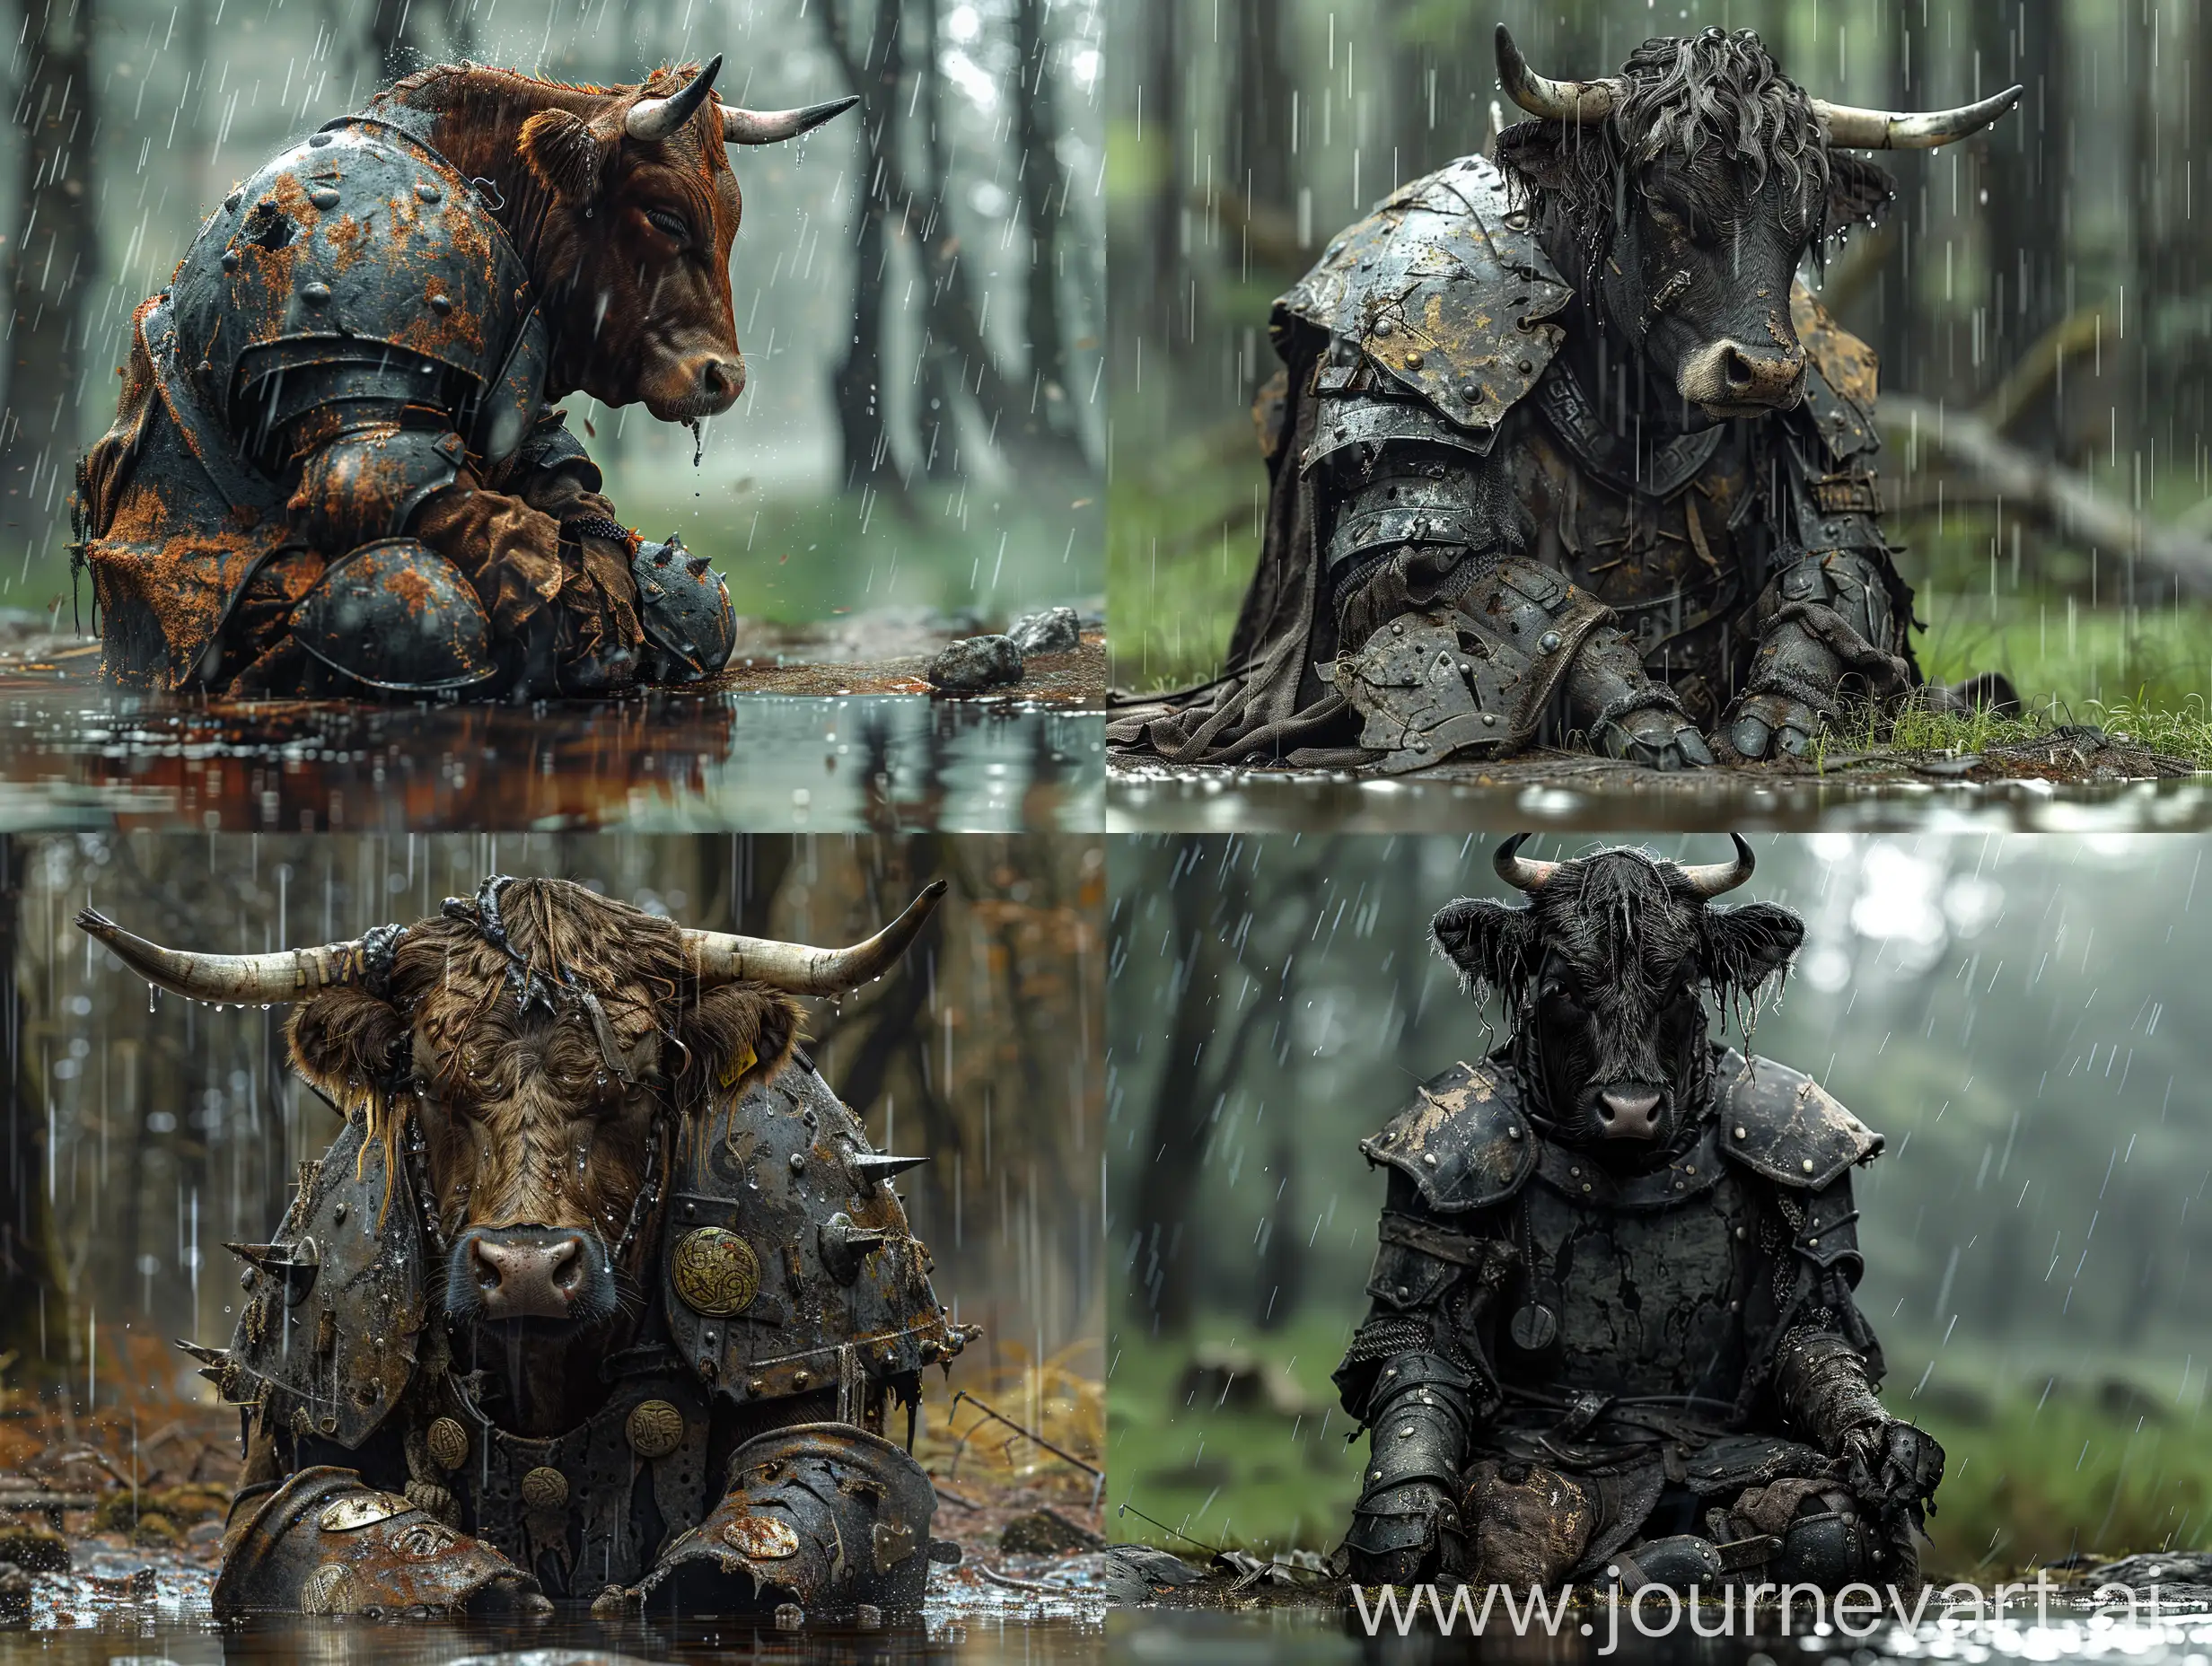 BattleWorn-Medieval-Cow-in-Forest-Rainy-Reflections